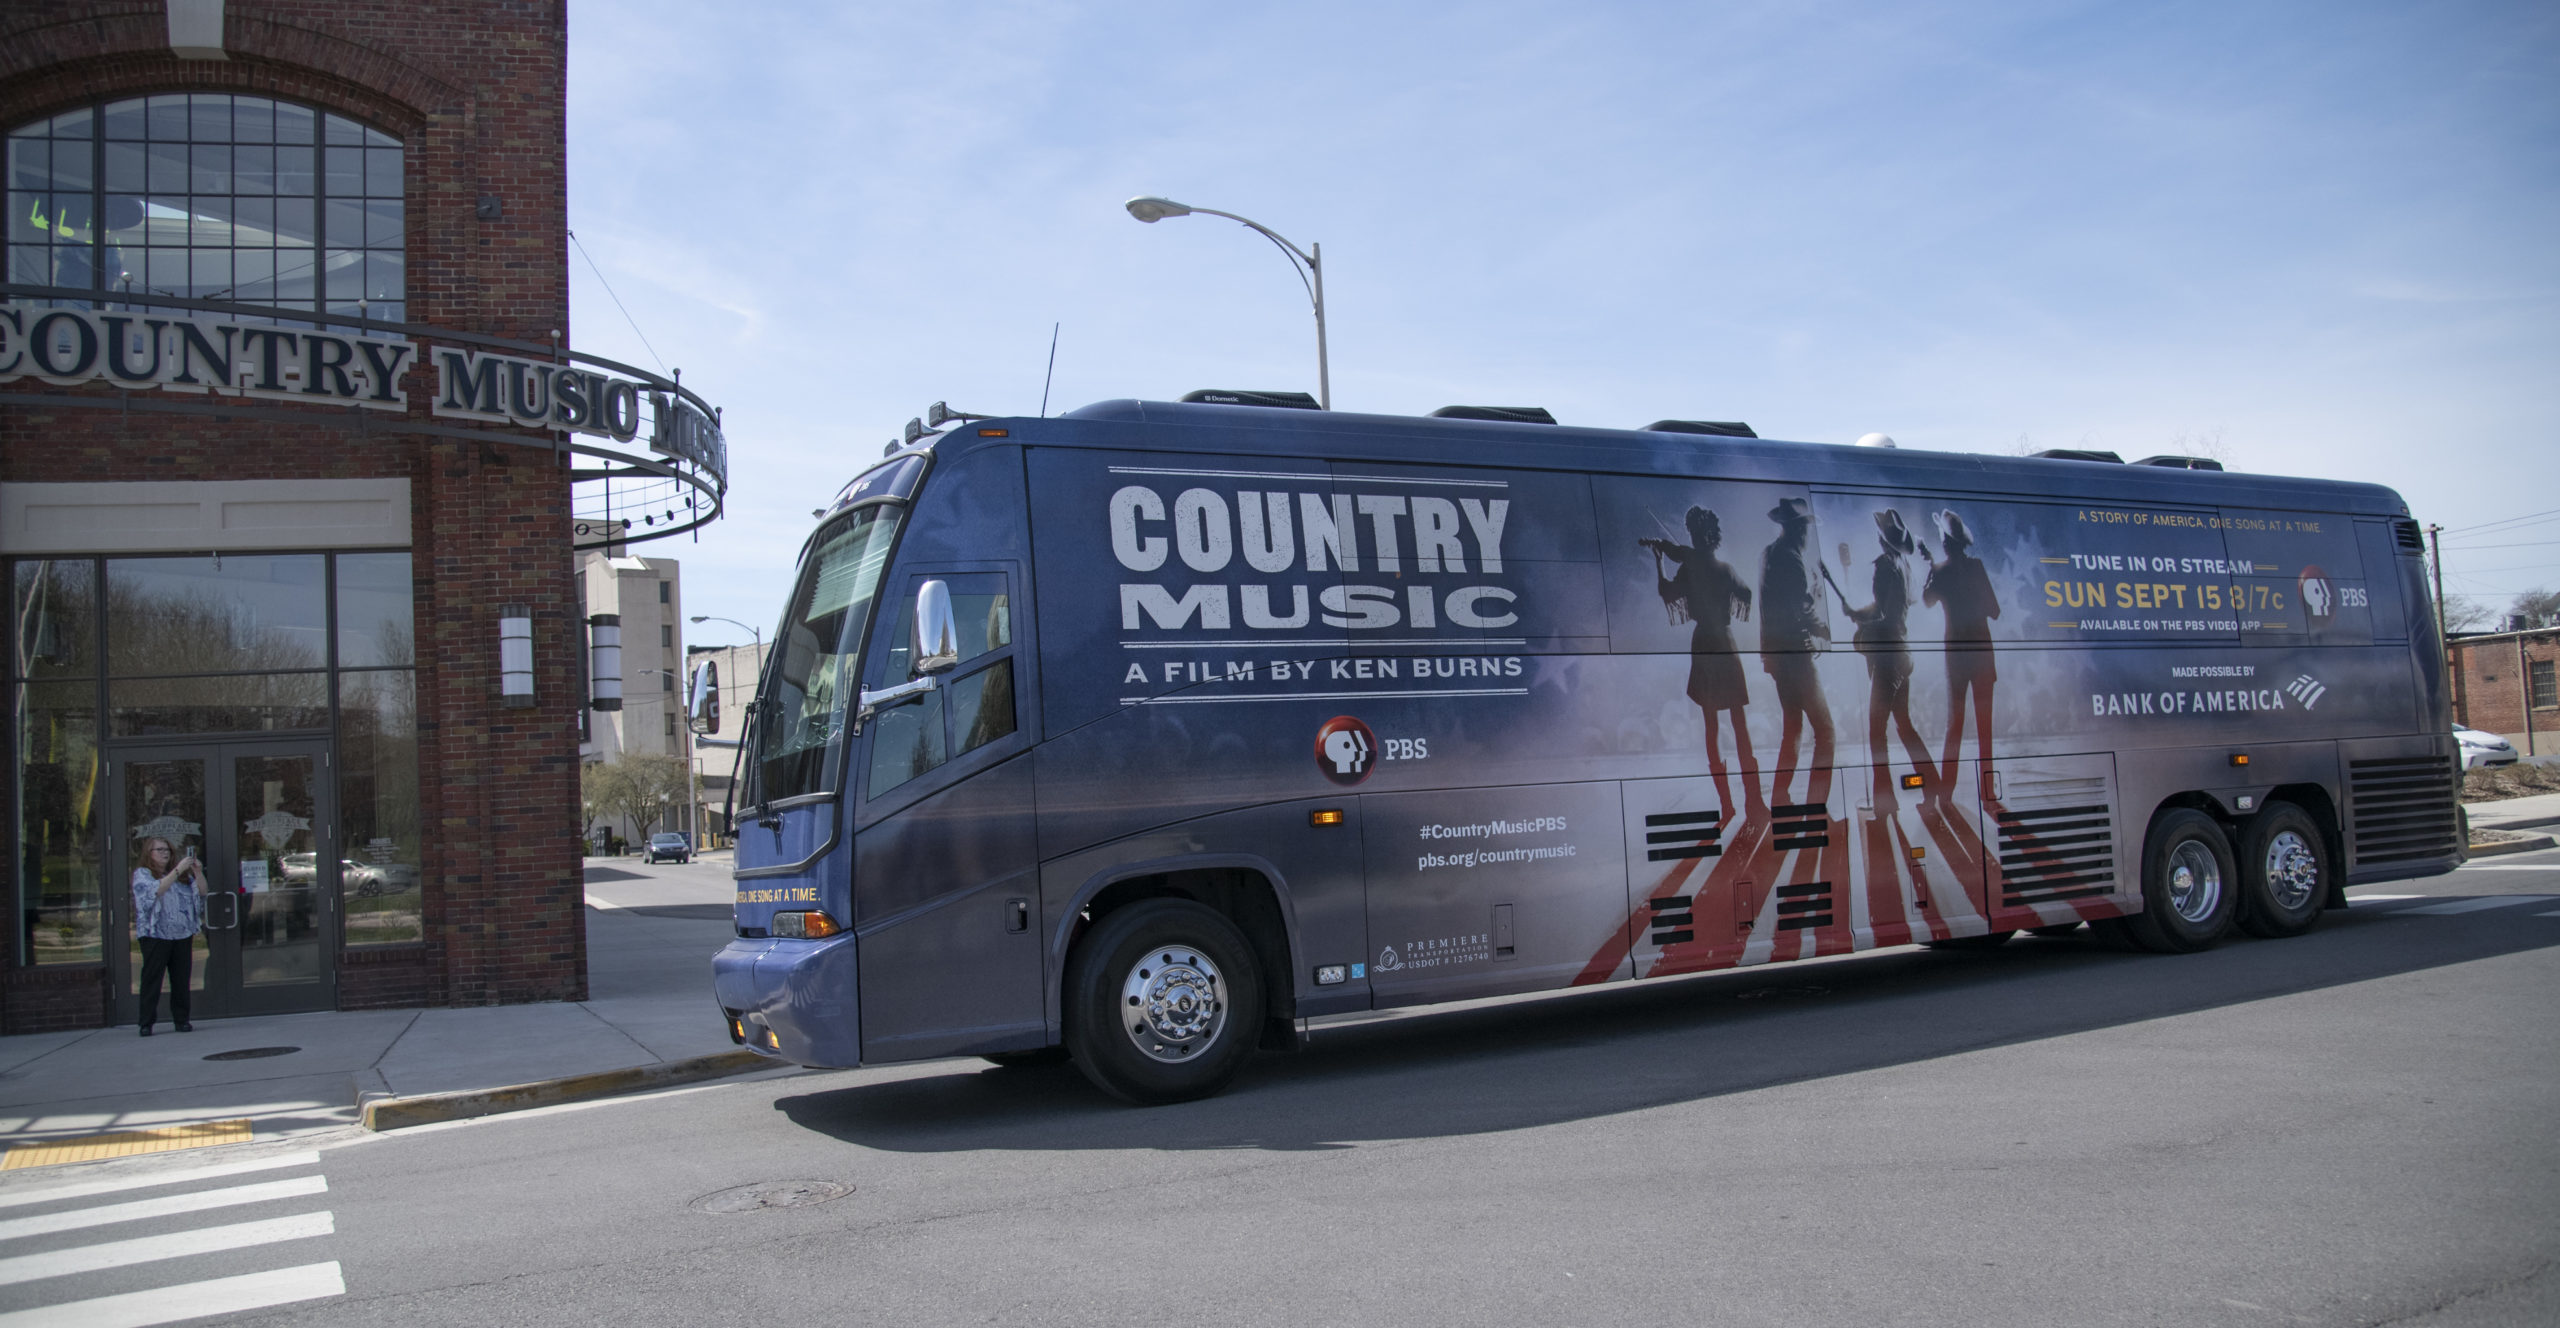 The Ken Burns' Country Music bus, wrapped in an image of four musicians to promote the documentary, pulls up to the front door of the Birthplace of Country Music Museum.